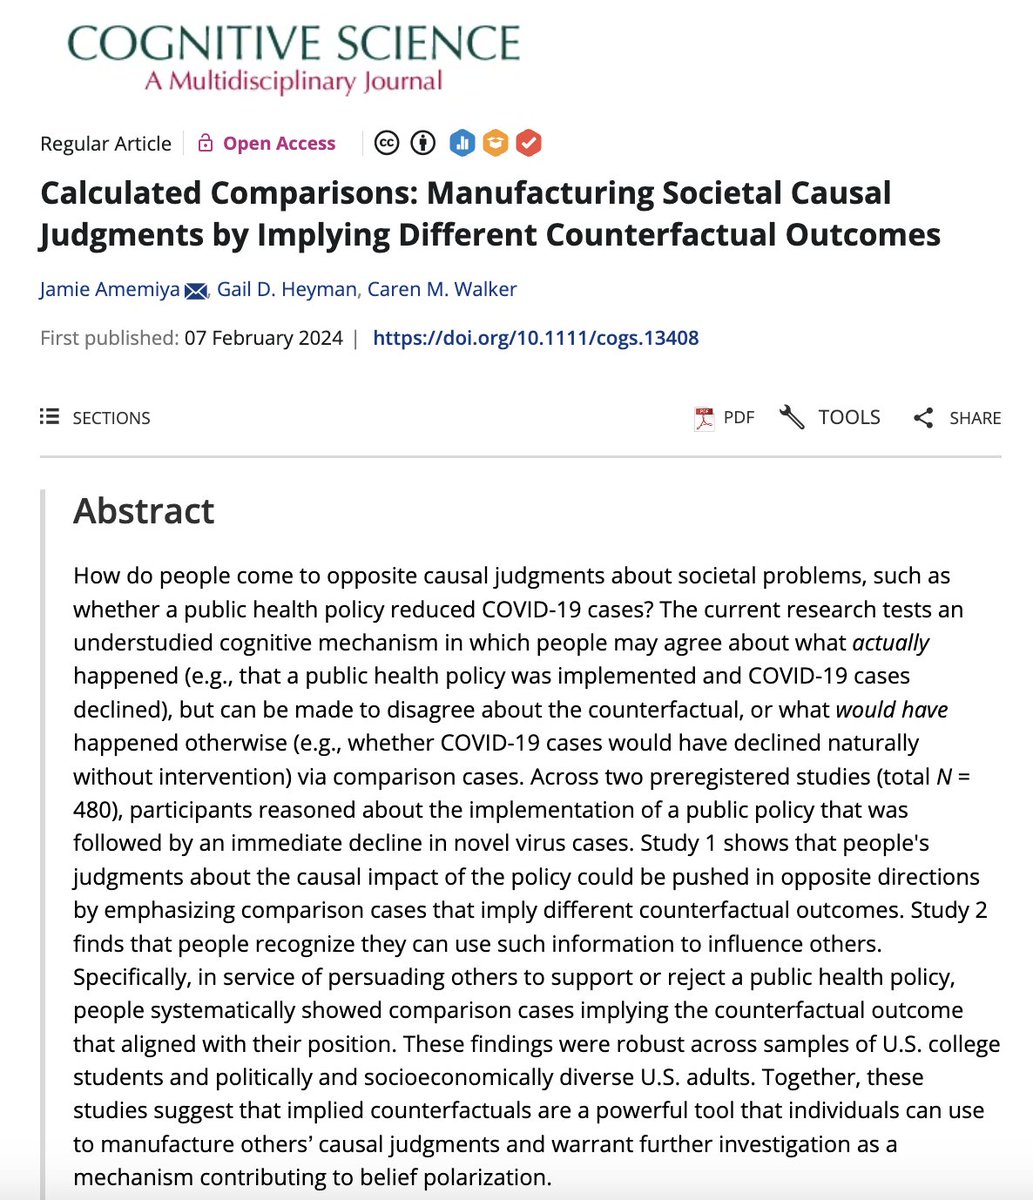 How do people come to opposite causal judgments about whether a public health policy worked? We find that, even if people agree on what actually happened (i.e., viruses decreased), they can be made to disagree about the *counterfactual* of what would have happened otherwise.